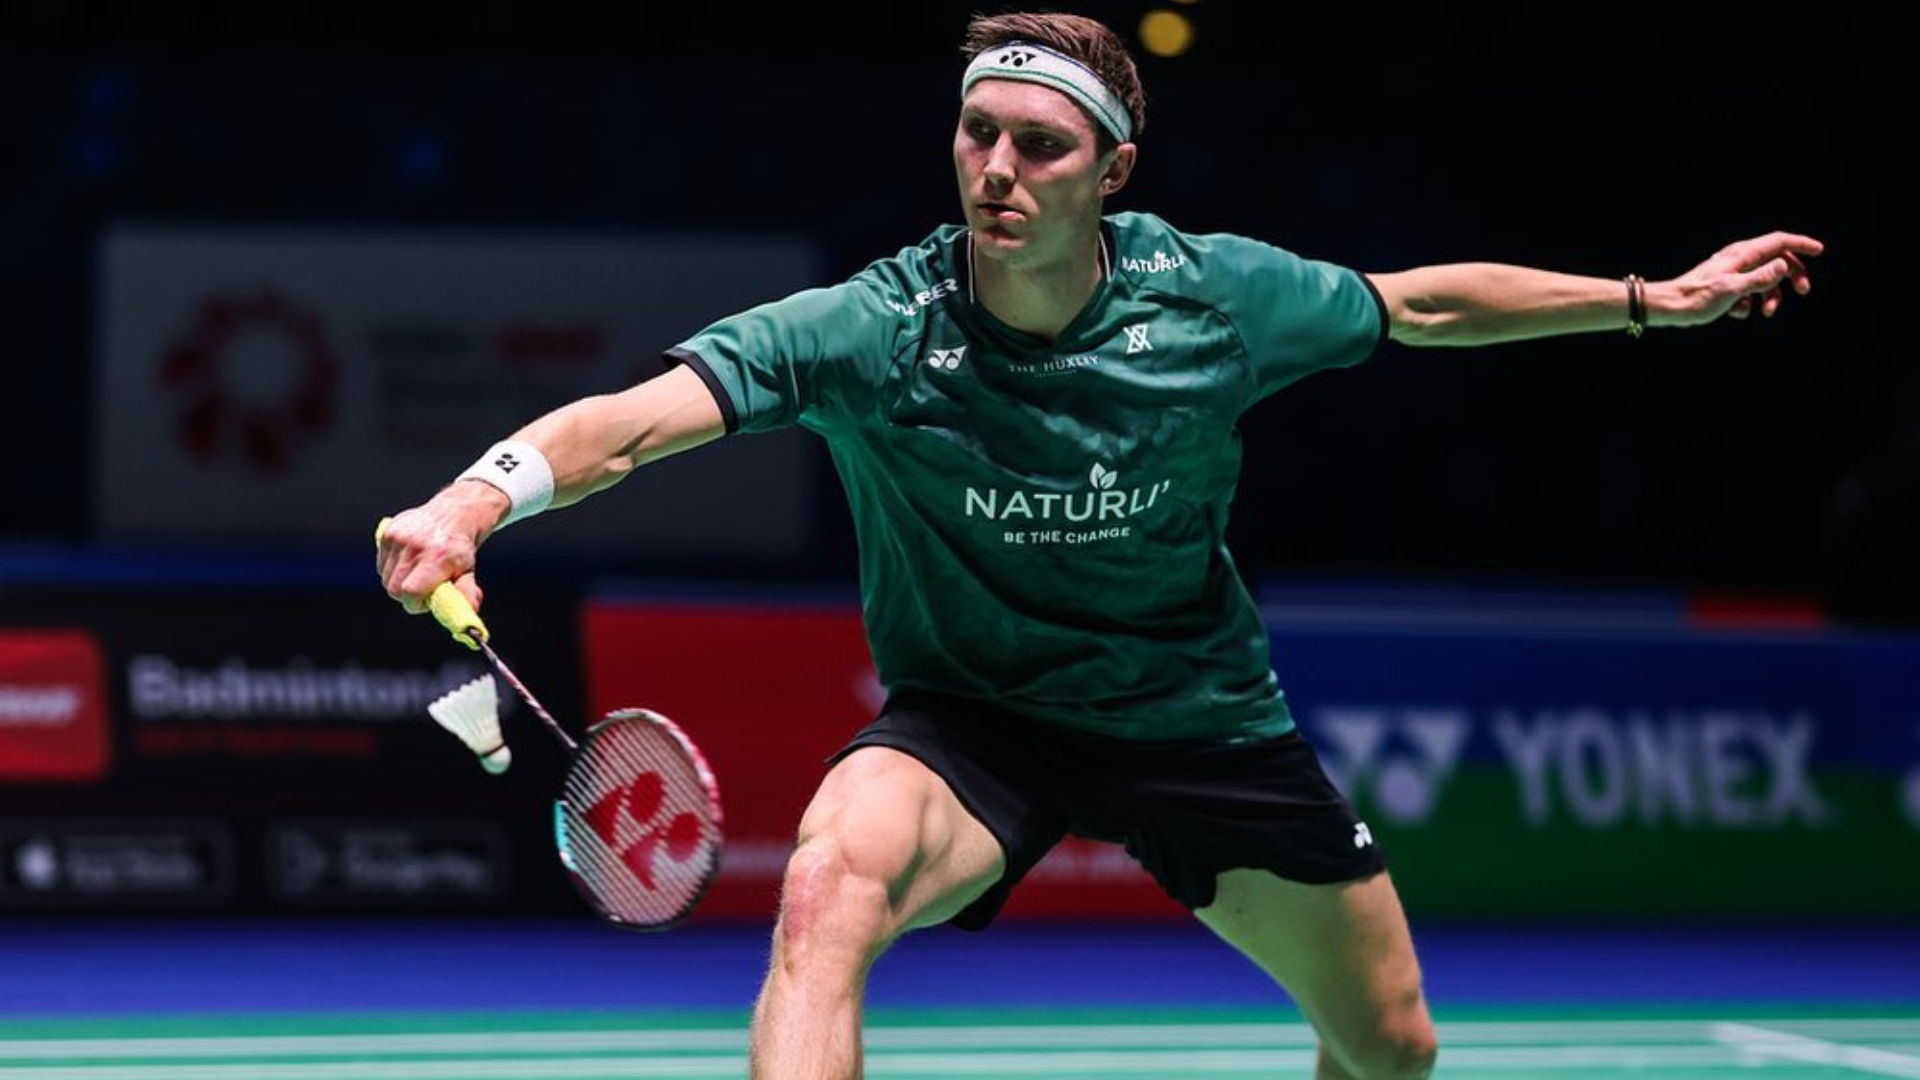 2023 Badminton Swiss Open What Is The Prize Money At Stake?